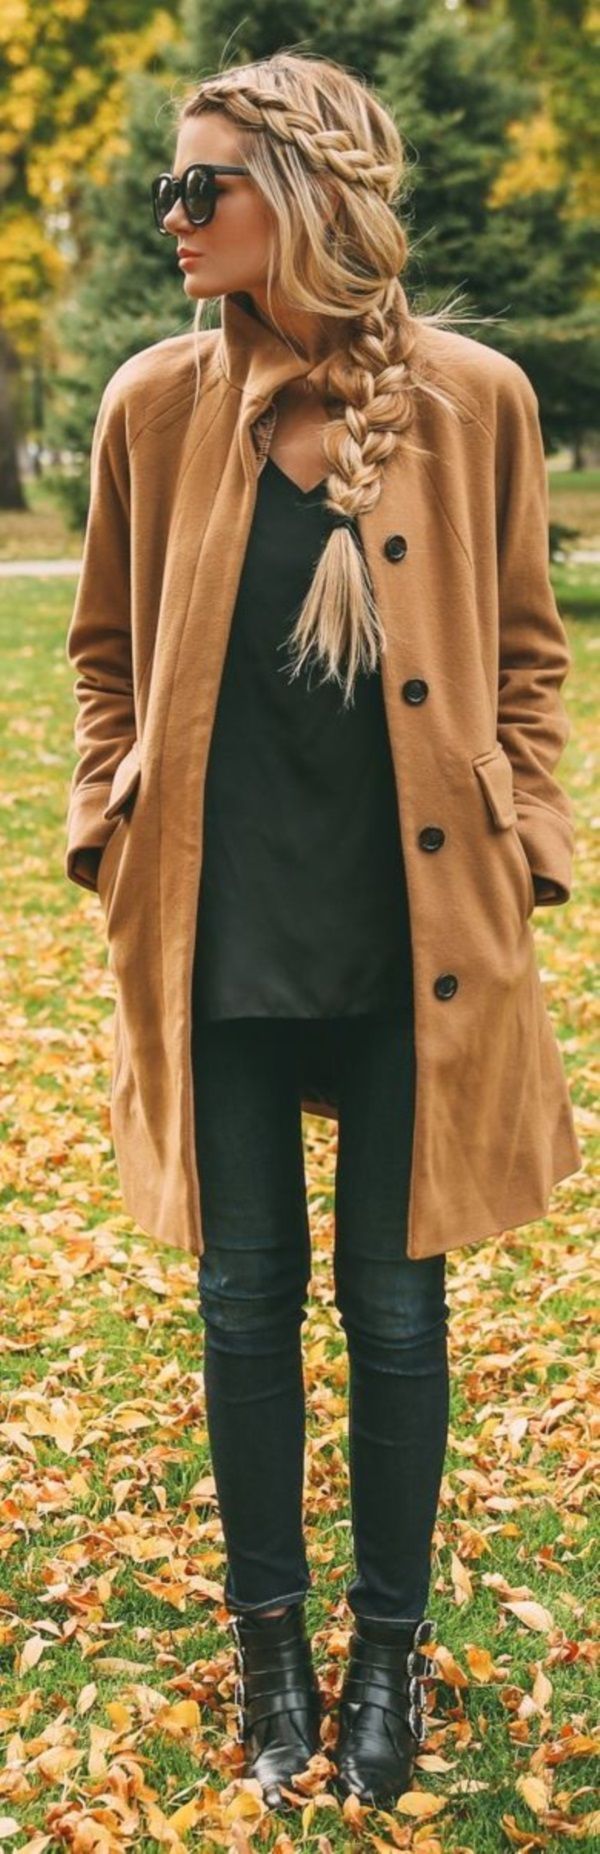 I love her fashion. Perfect for fall